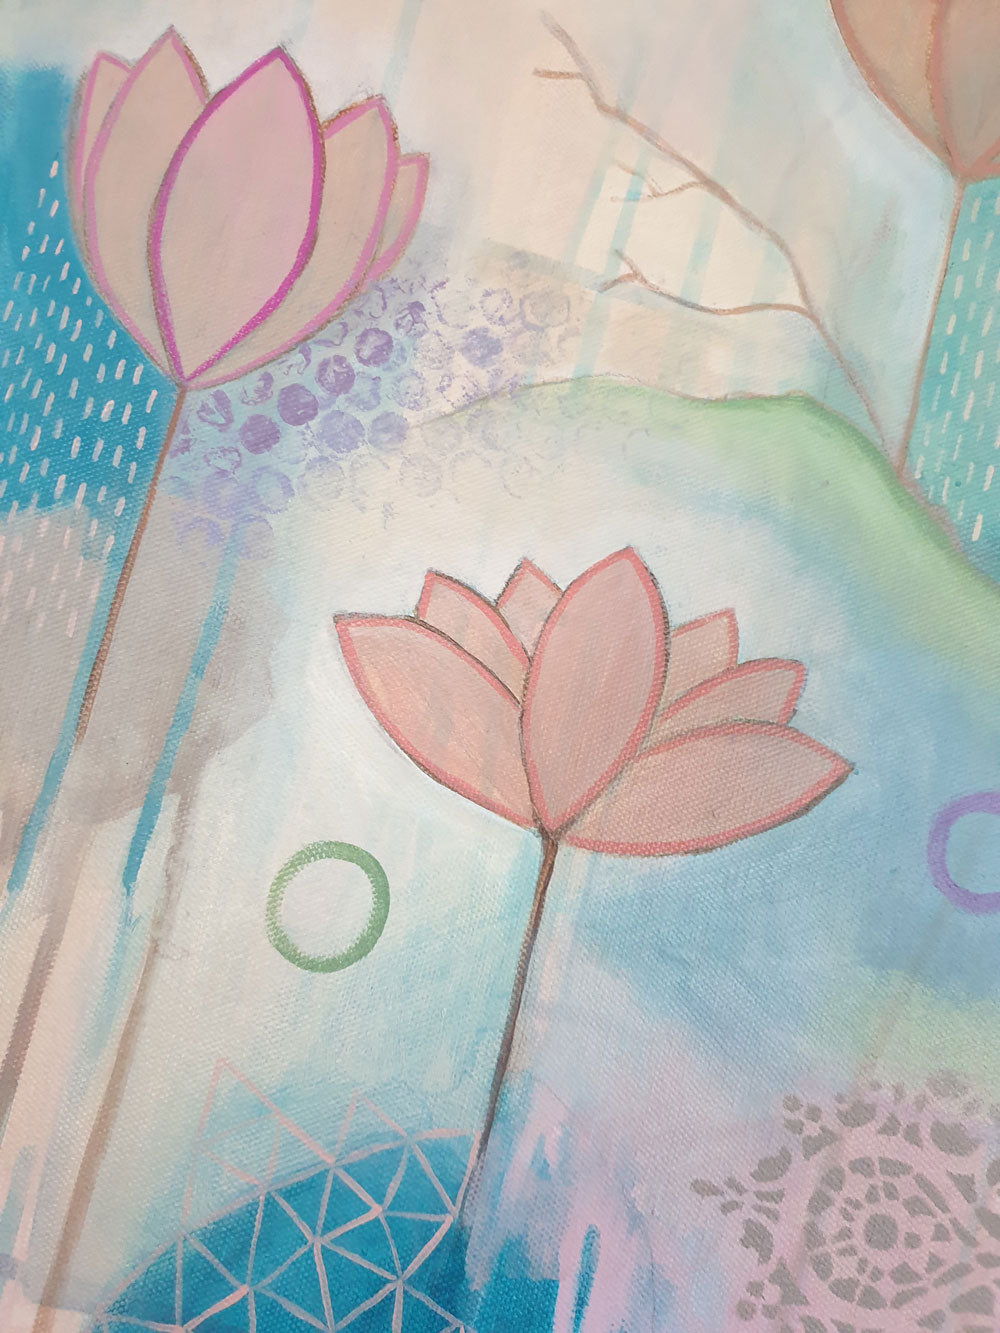 Dragonfly & lotus flower painting, original art, Libby Mills. Close up view.